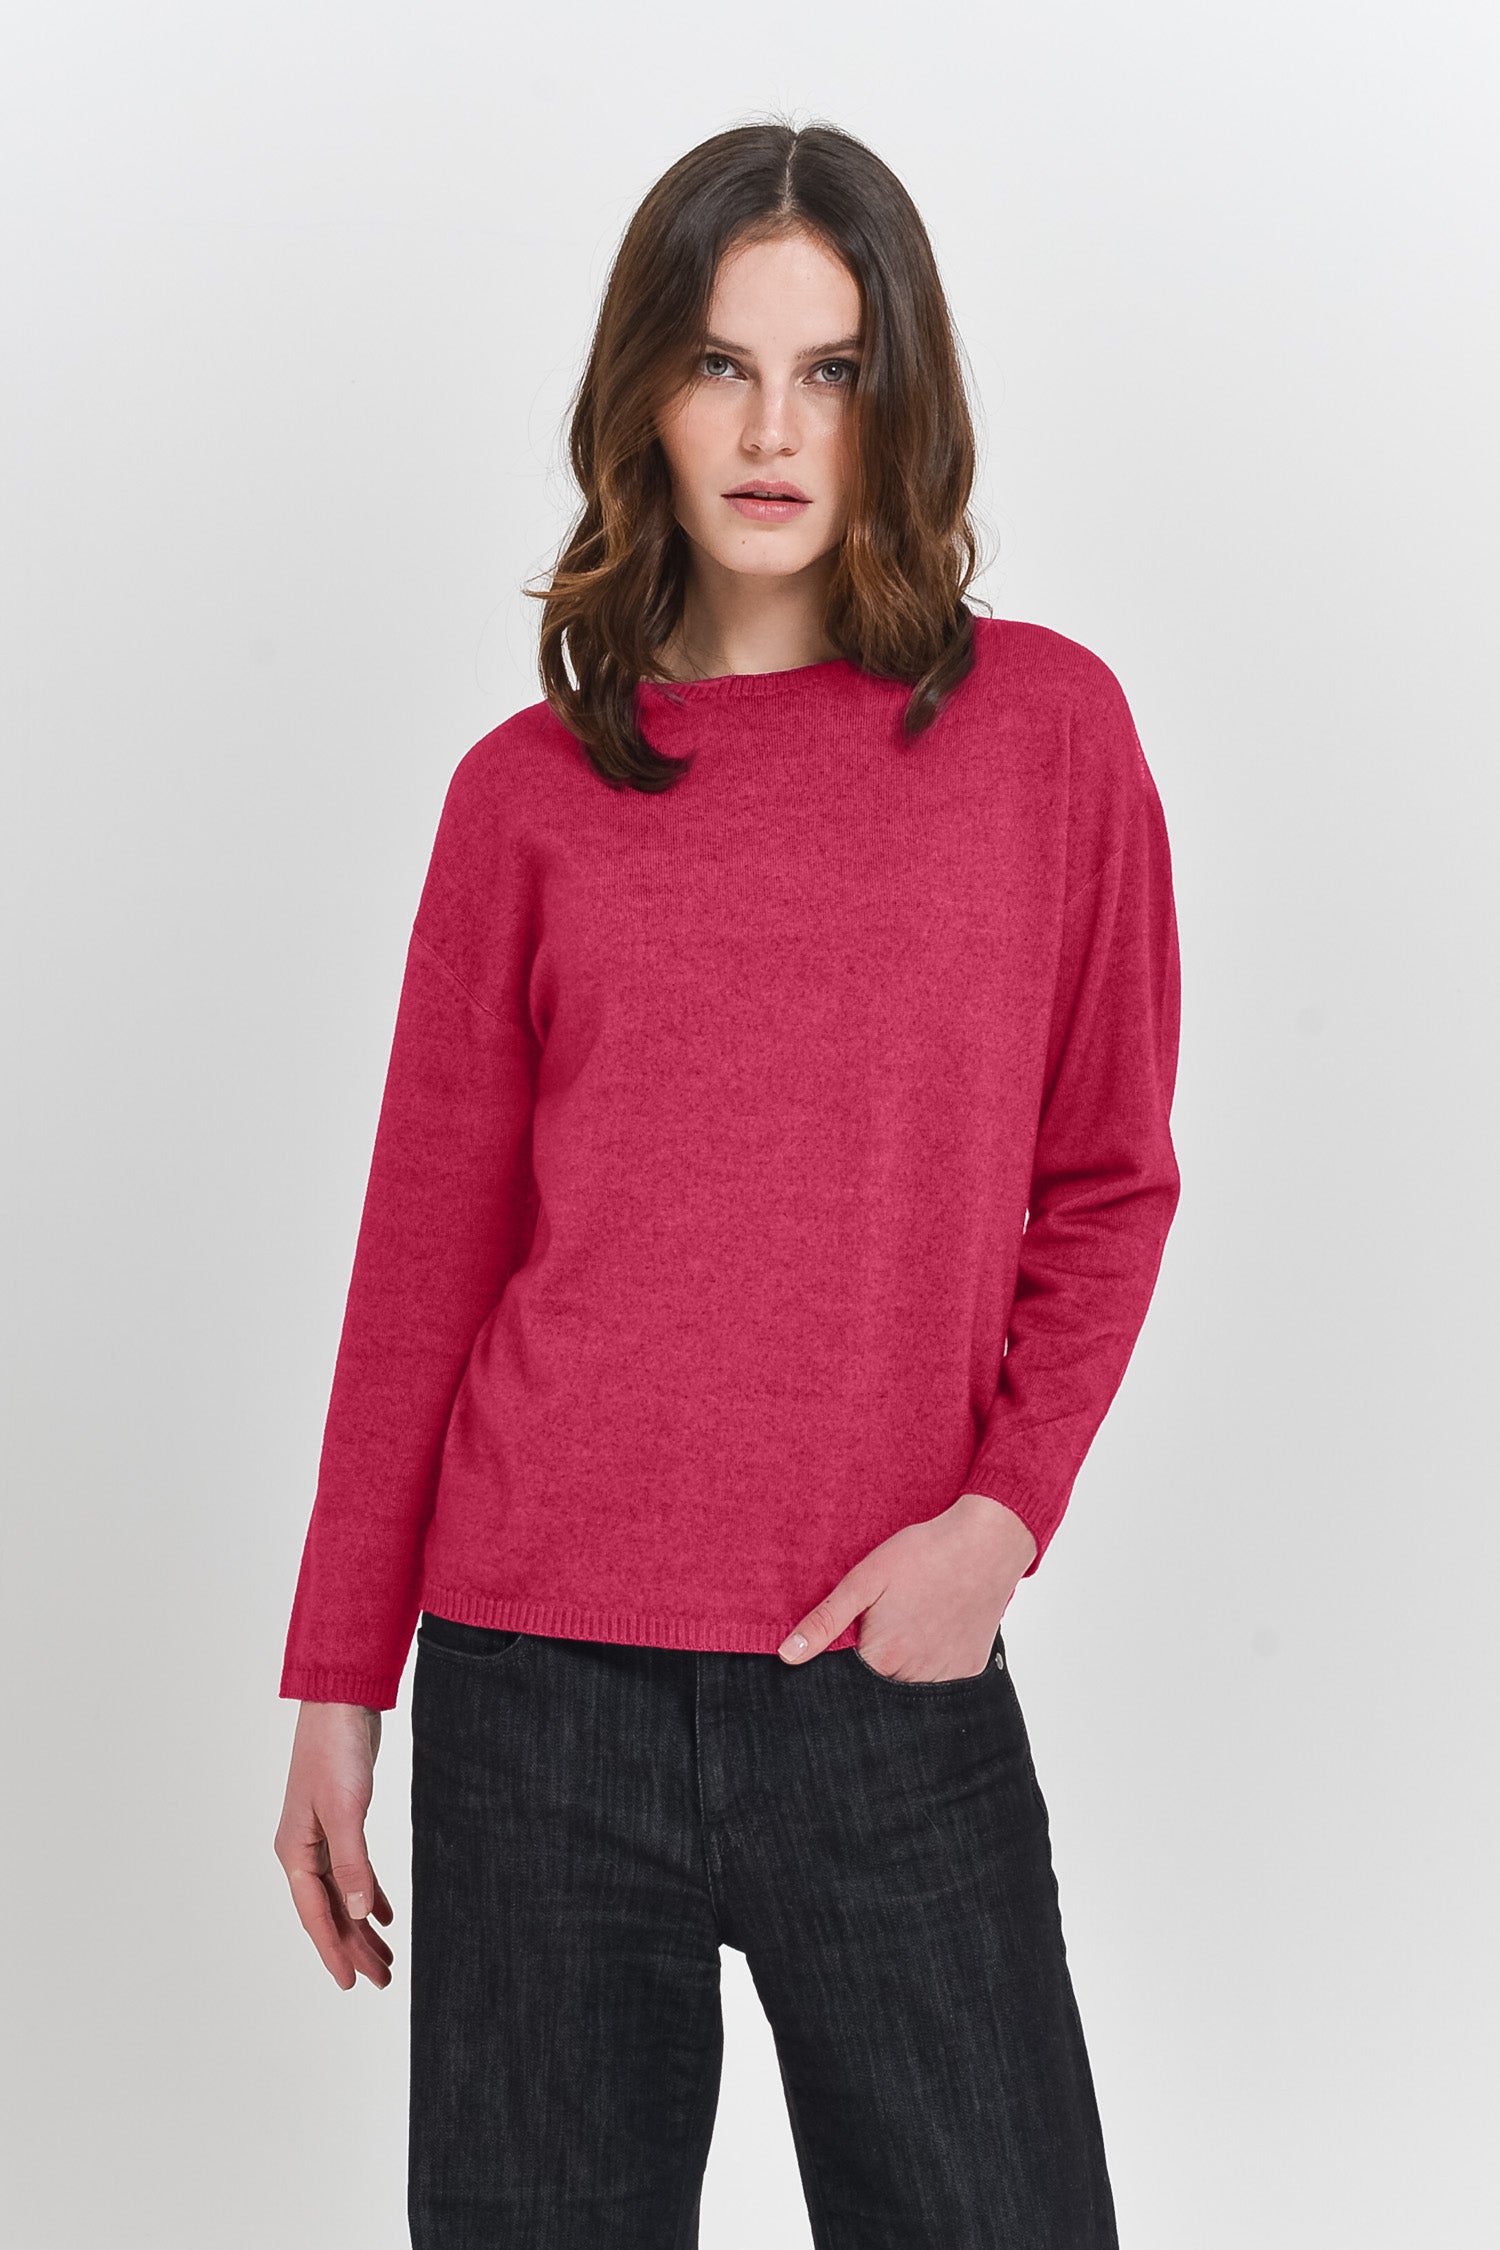 Reay Comfy Sweater - Scarlet